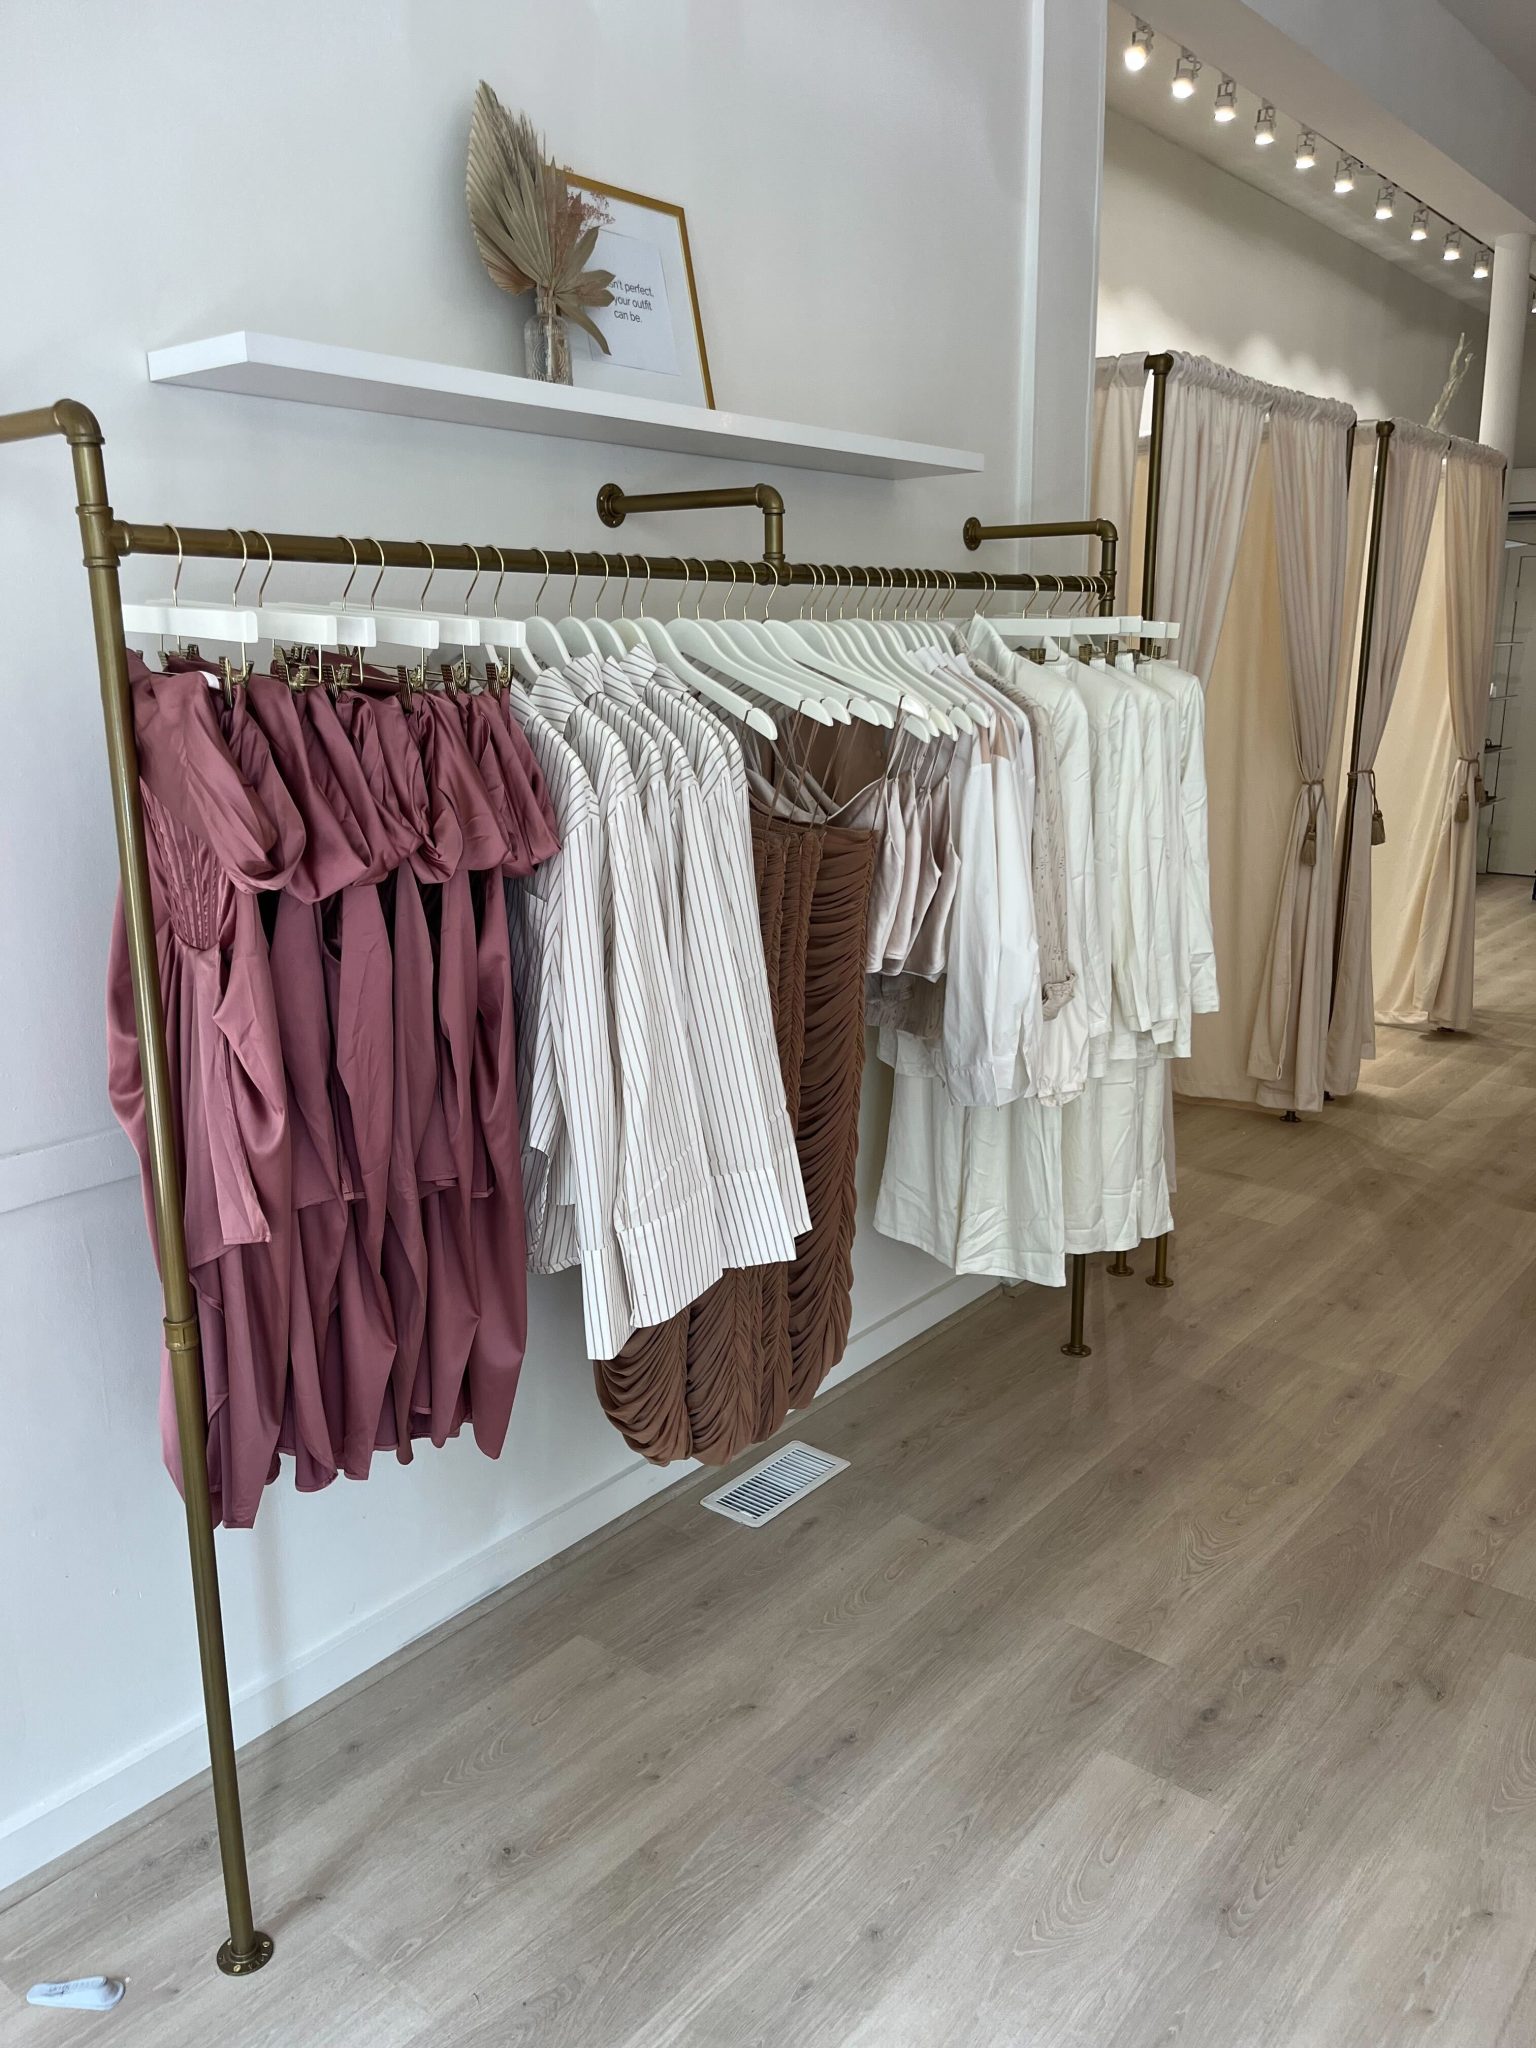 A lingerie boutique blooms in Hingham